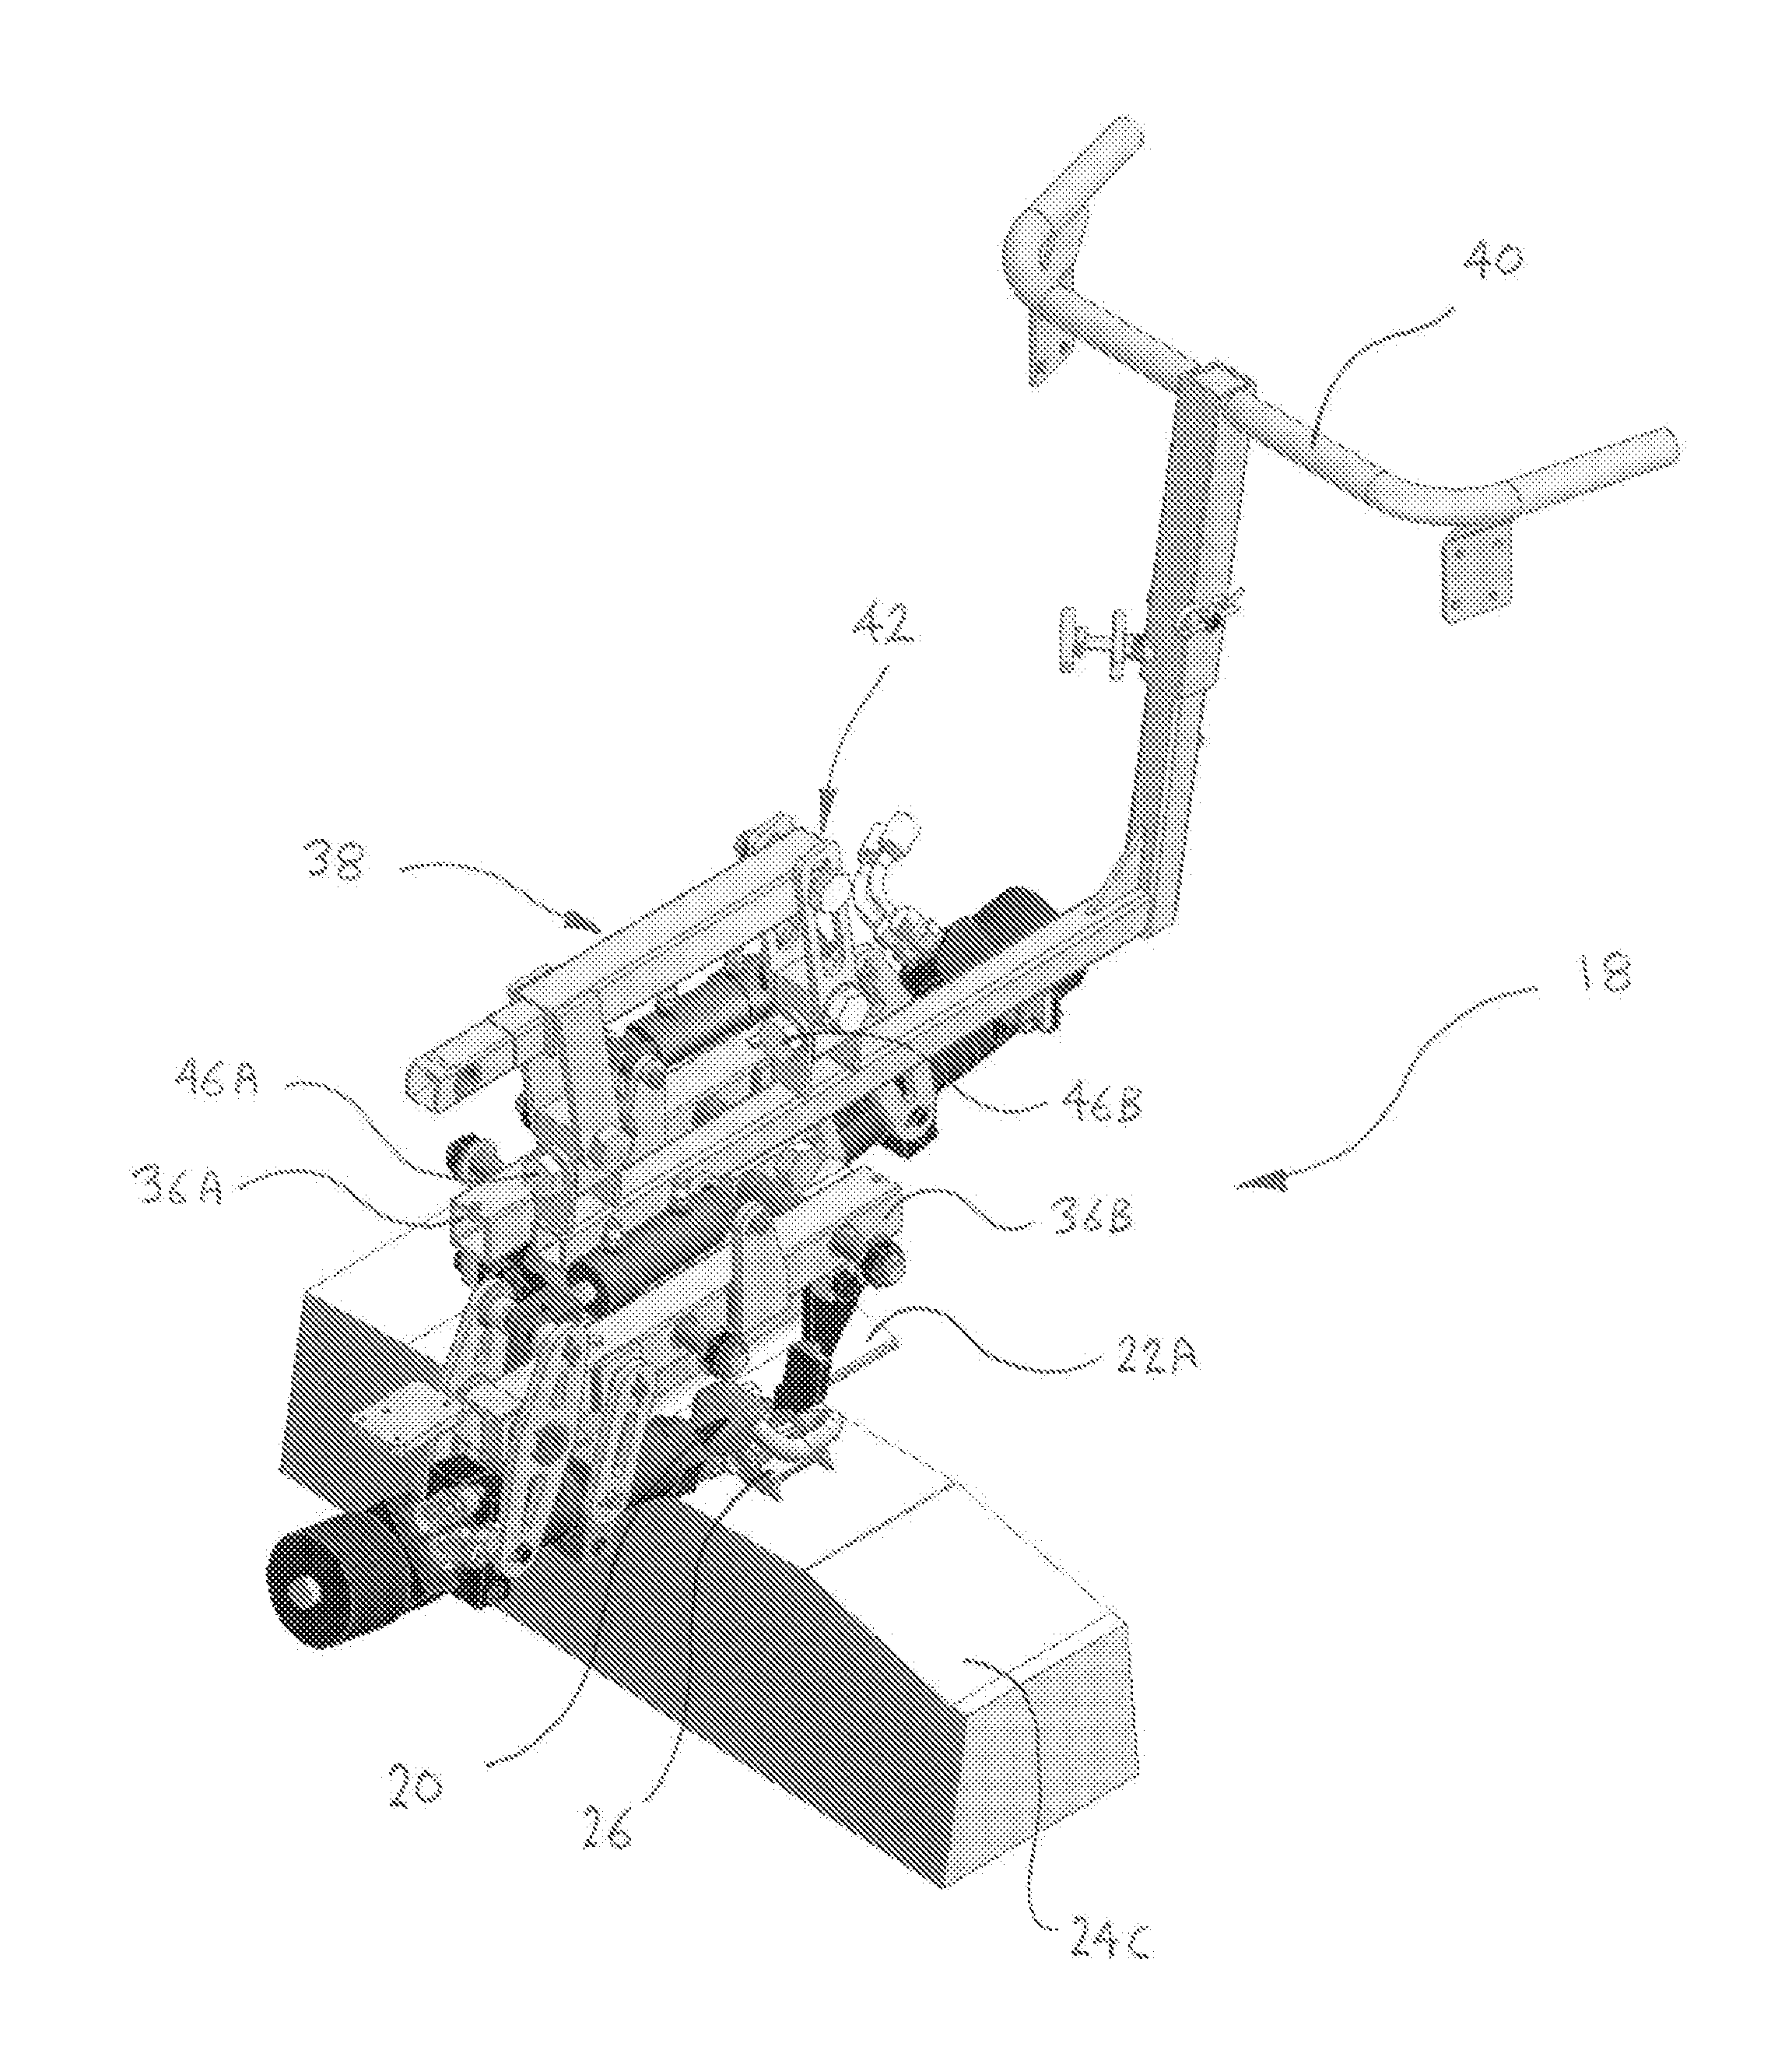 Apparatus for the application or removal of railway track fasteners